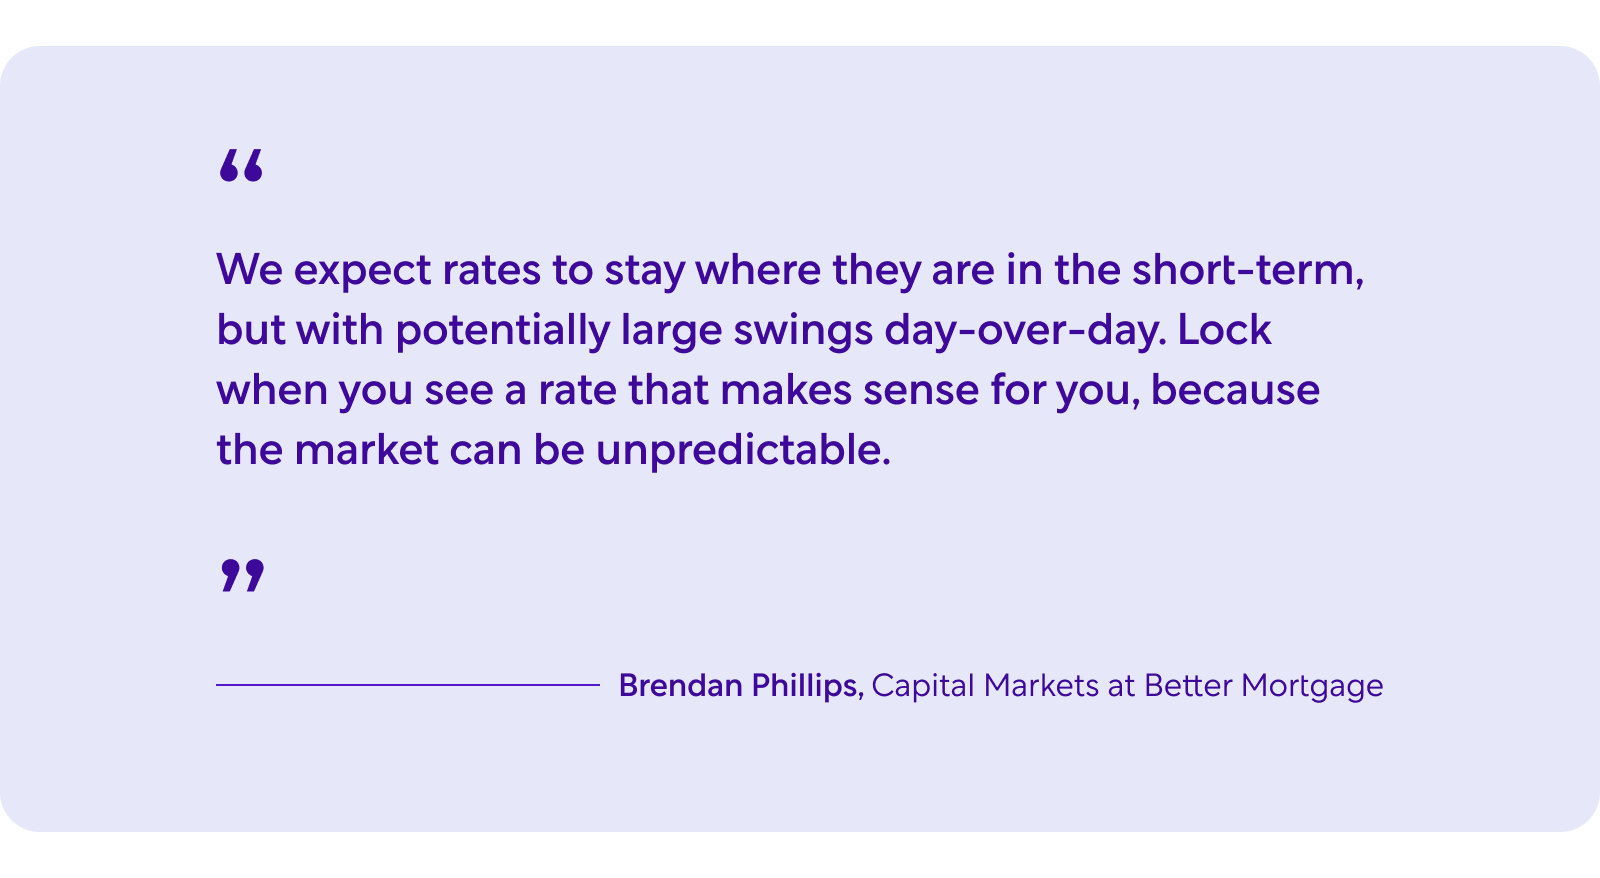 Quote by Brendan Phillips, Capital Markets at Better Mortgage